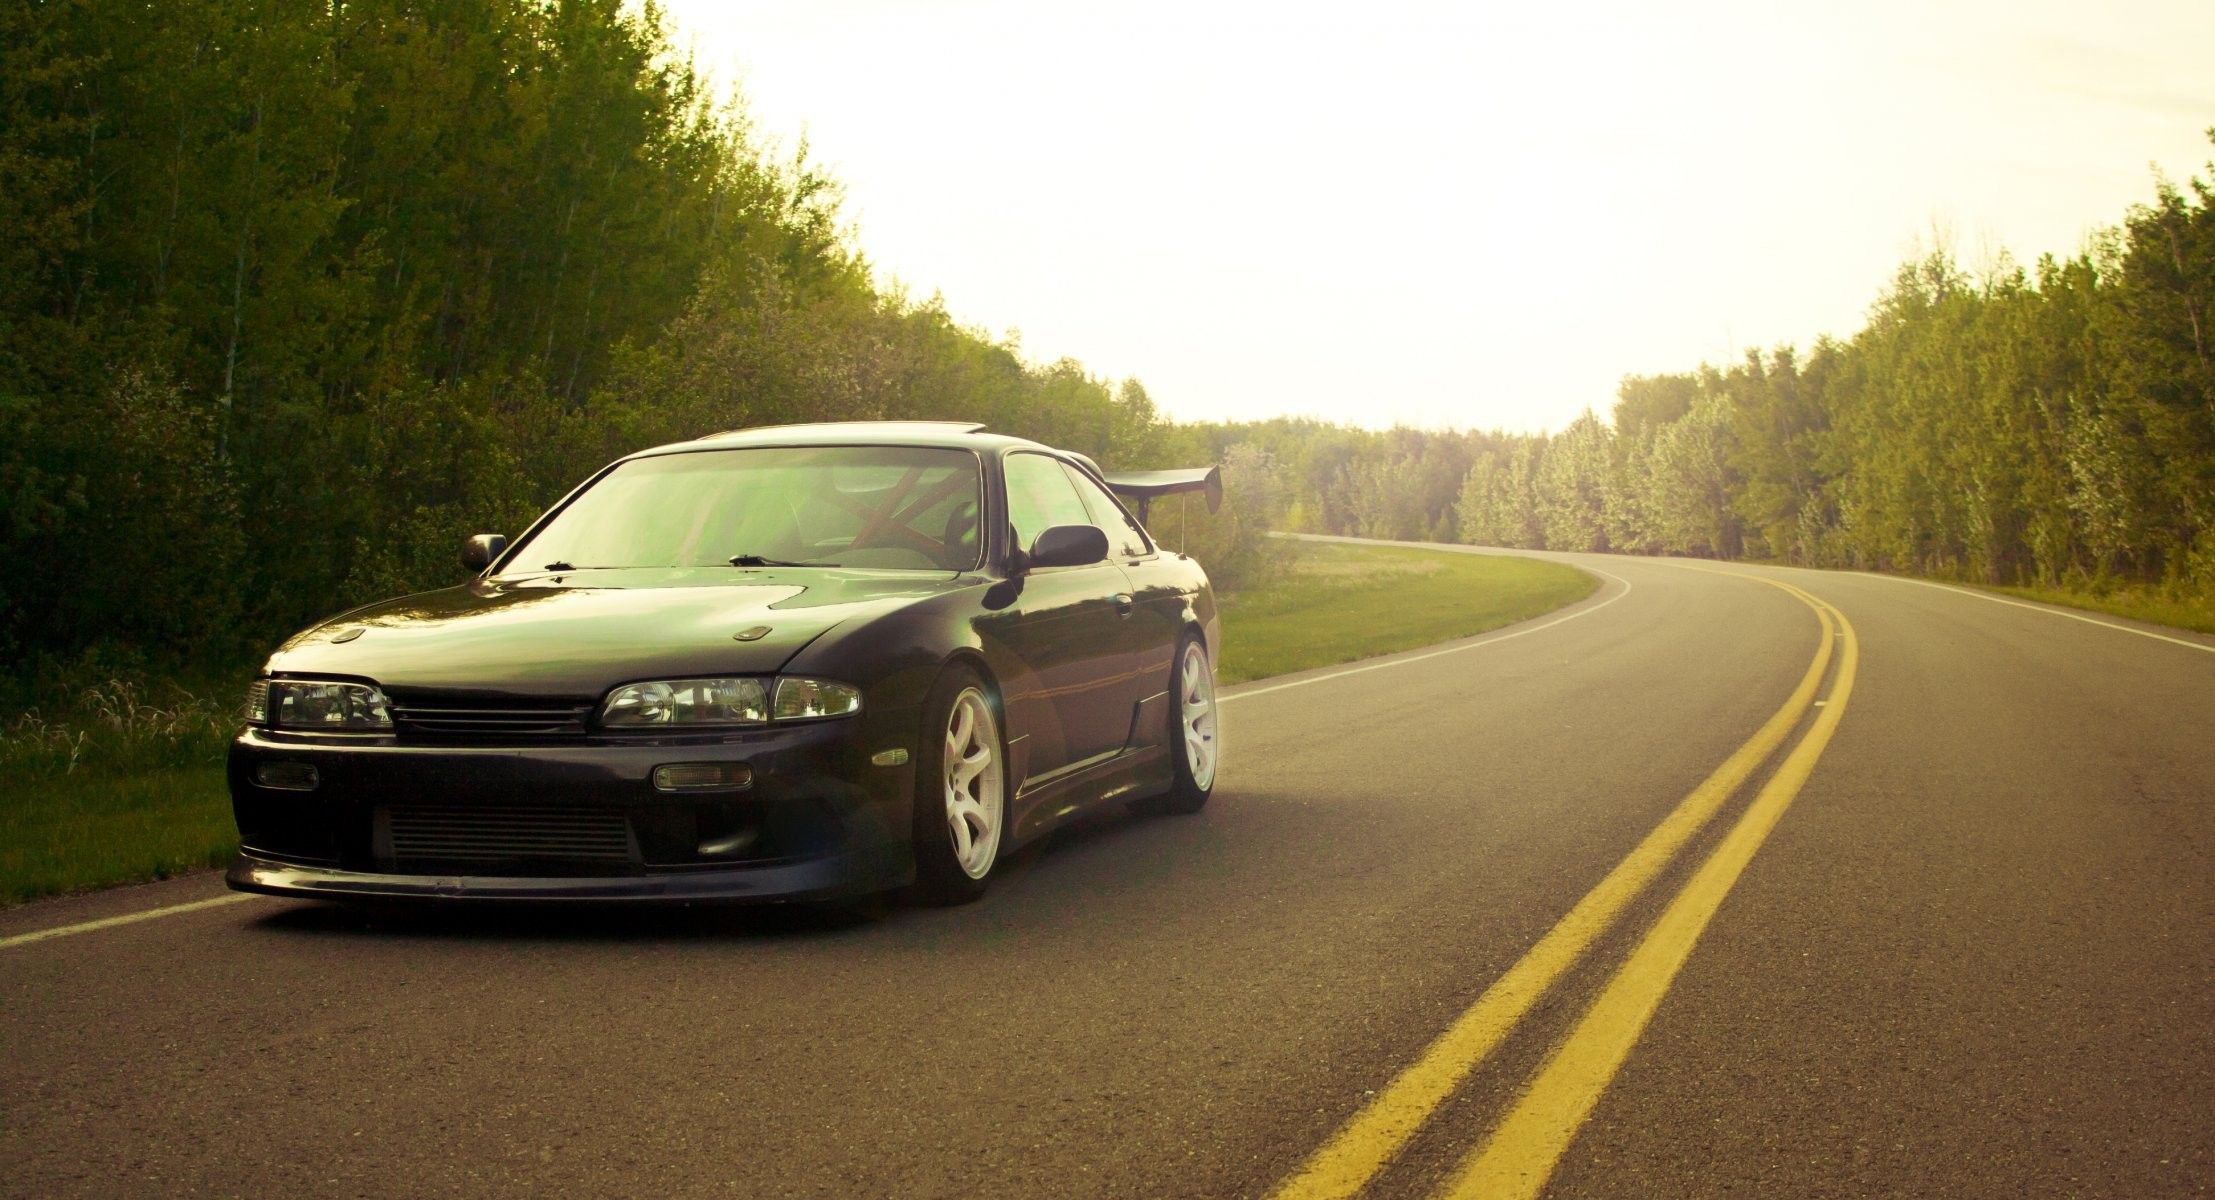 Auto Cars Nissan S14 Tuning Cars Tuning Wallpaper